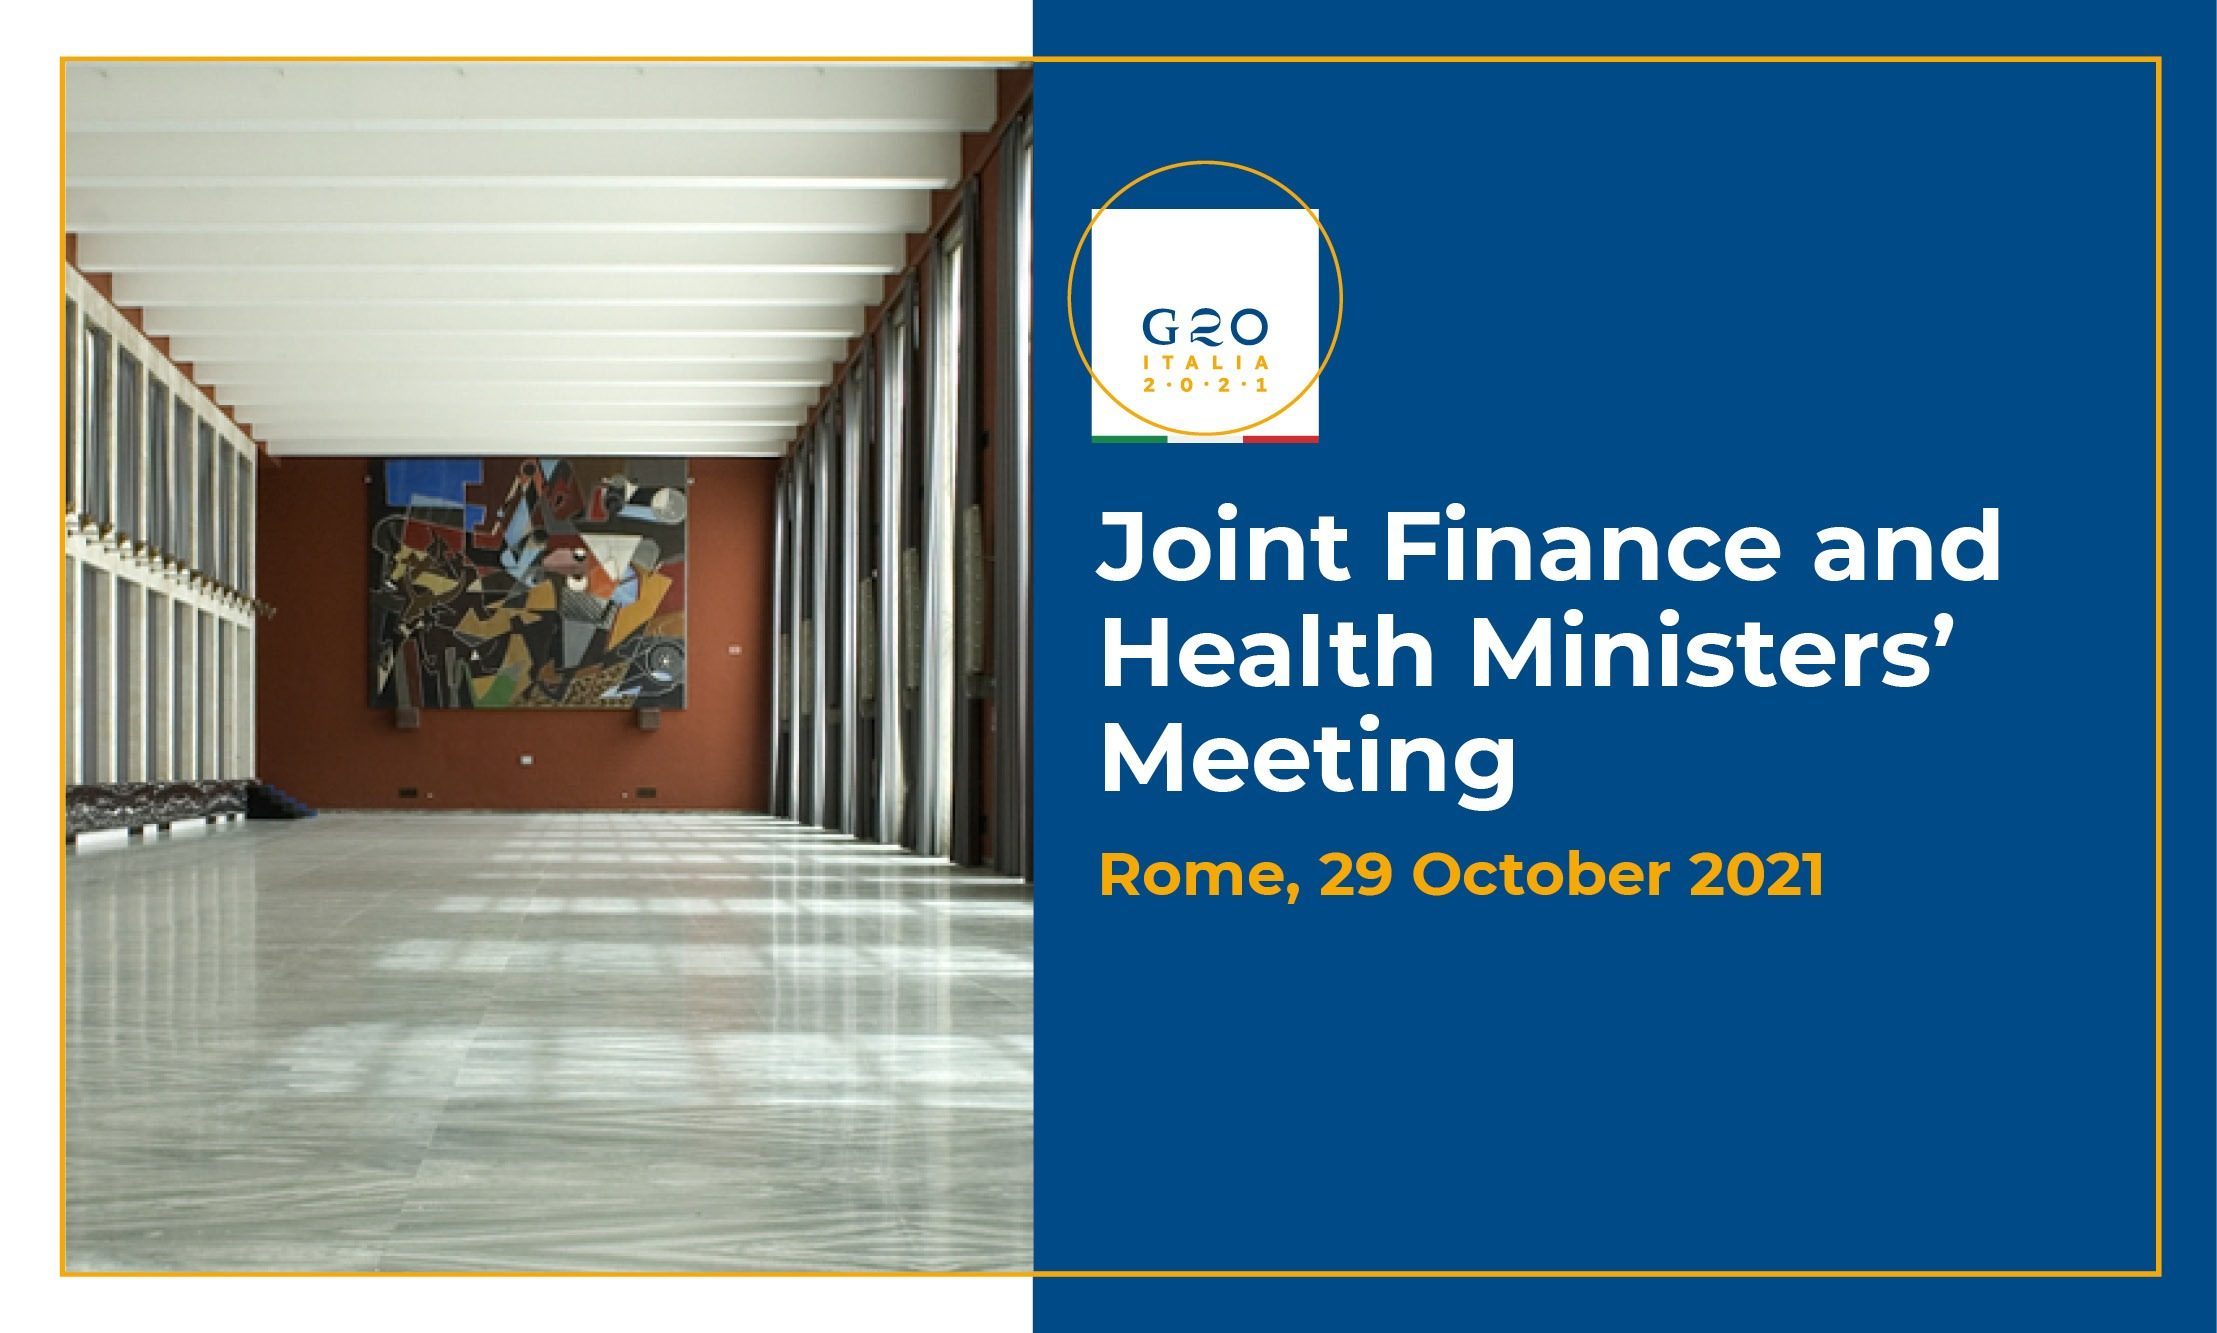 First G20 Joint Finance and Health Ministers’ Meeting under the Italian Presidency